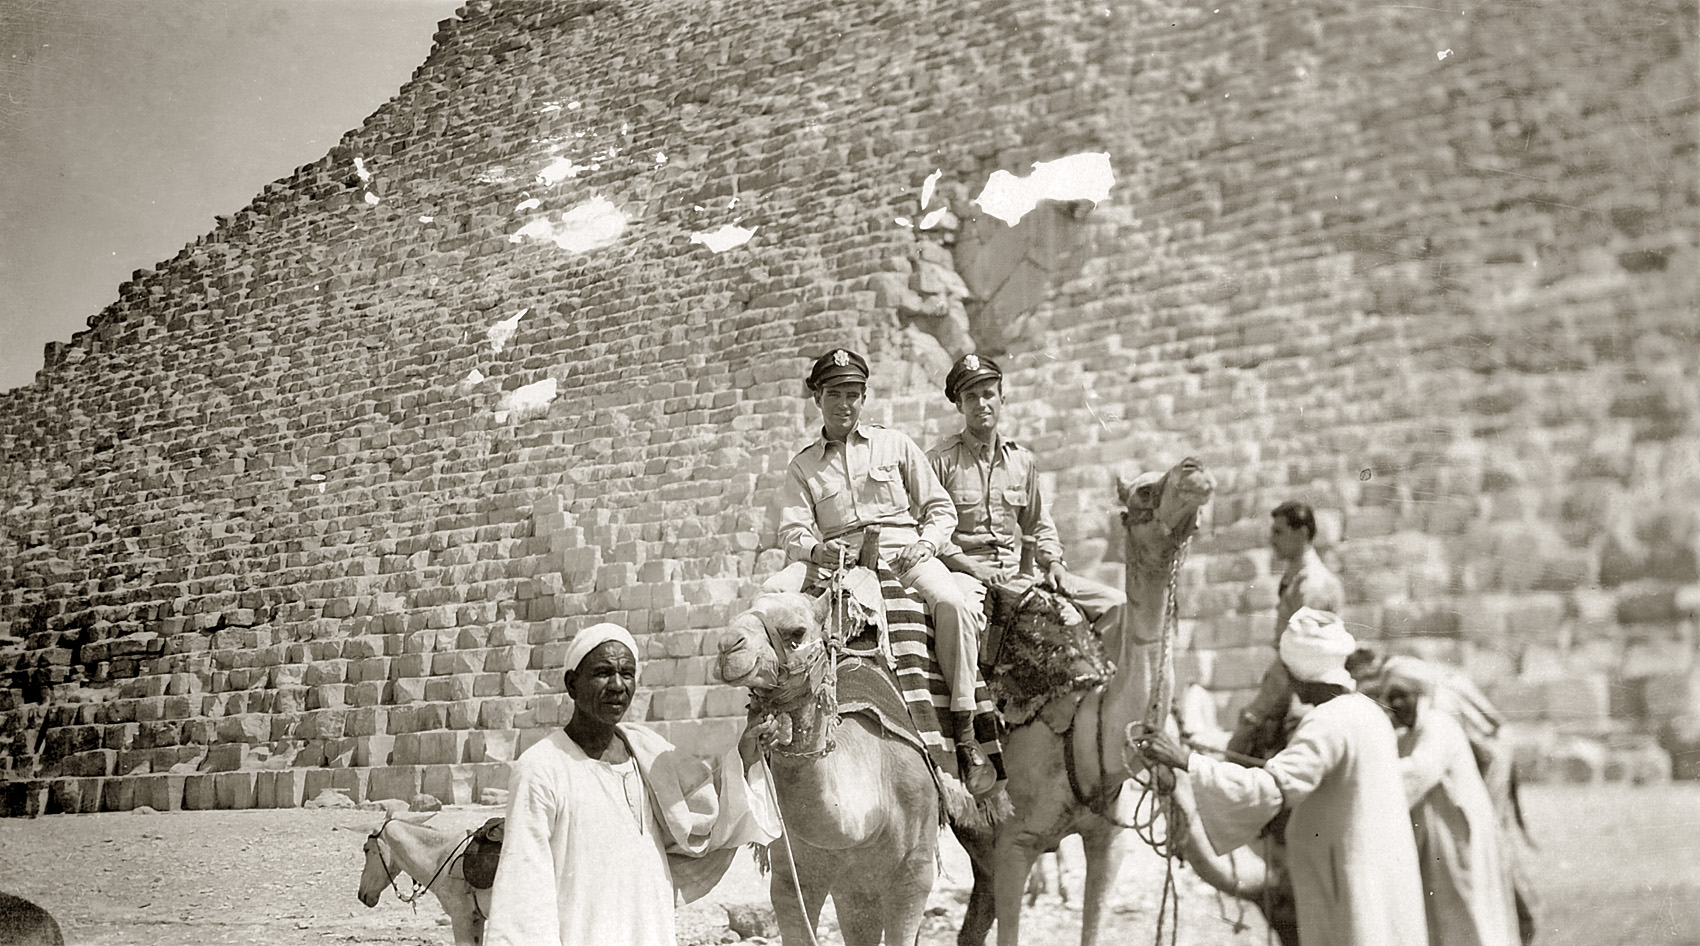 Here's my grandfather again at the Pyramids in Egypt sometime between late '44 and late '45 . There's no note on this print but he's clearly just being a tourist. View full size.